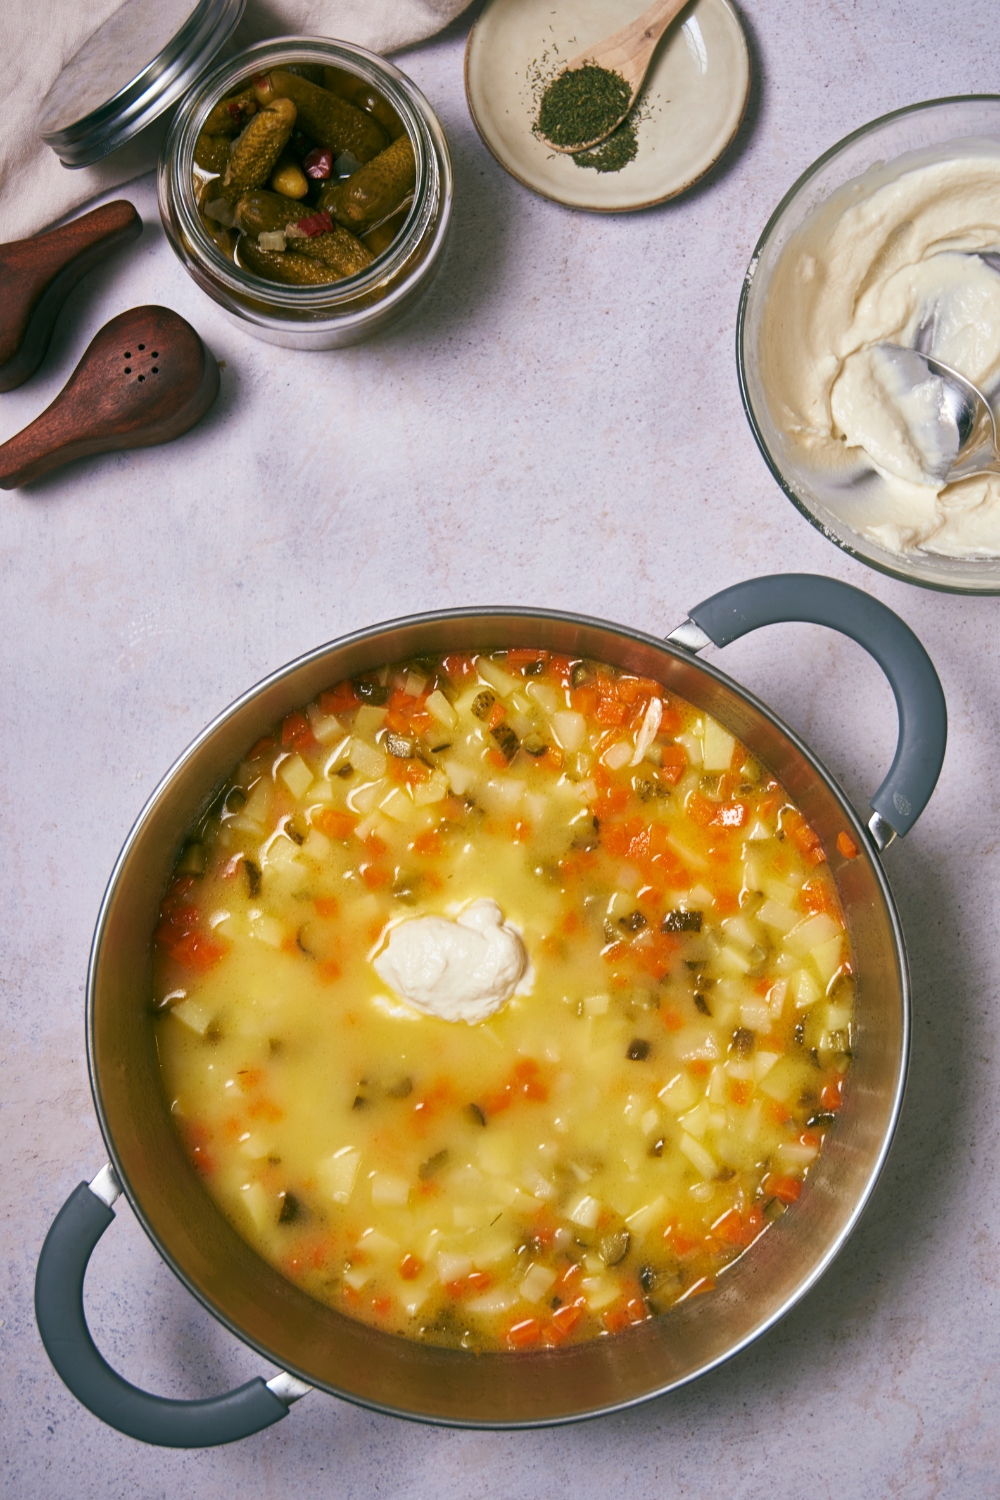 A dollop of sour cream in a pot that is filled with diced carrots, diced potatoes, diced pickles, and broth.